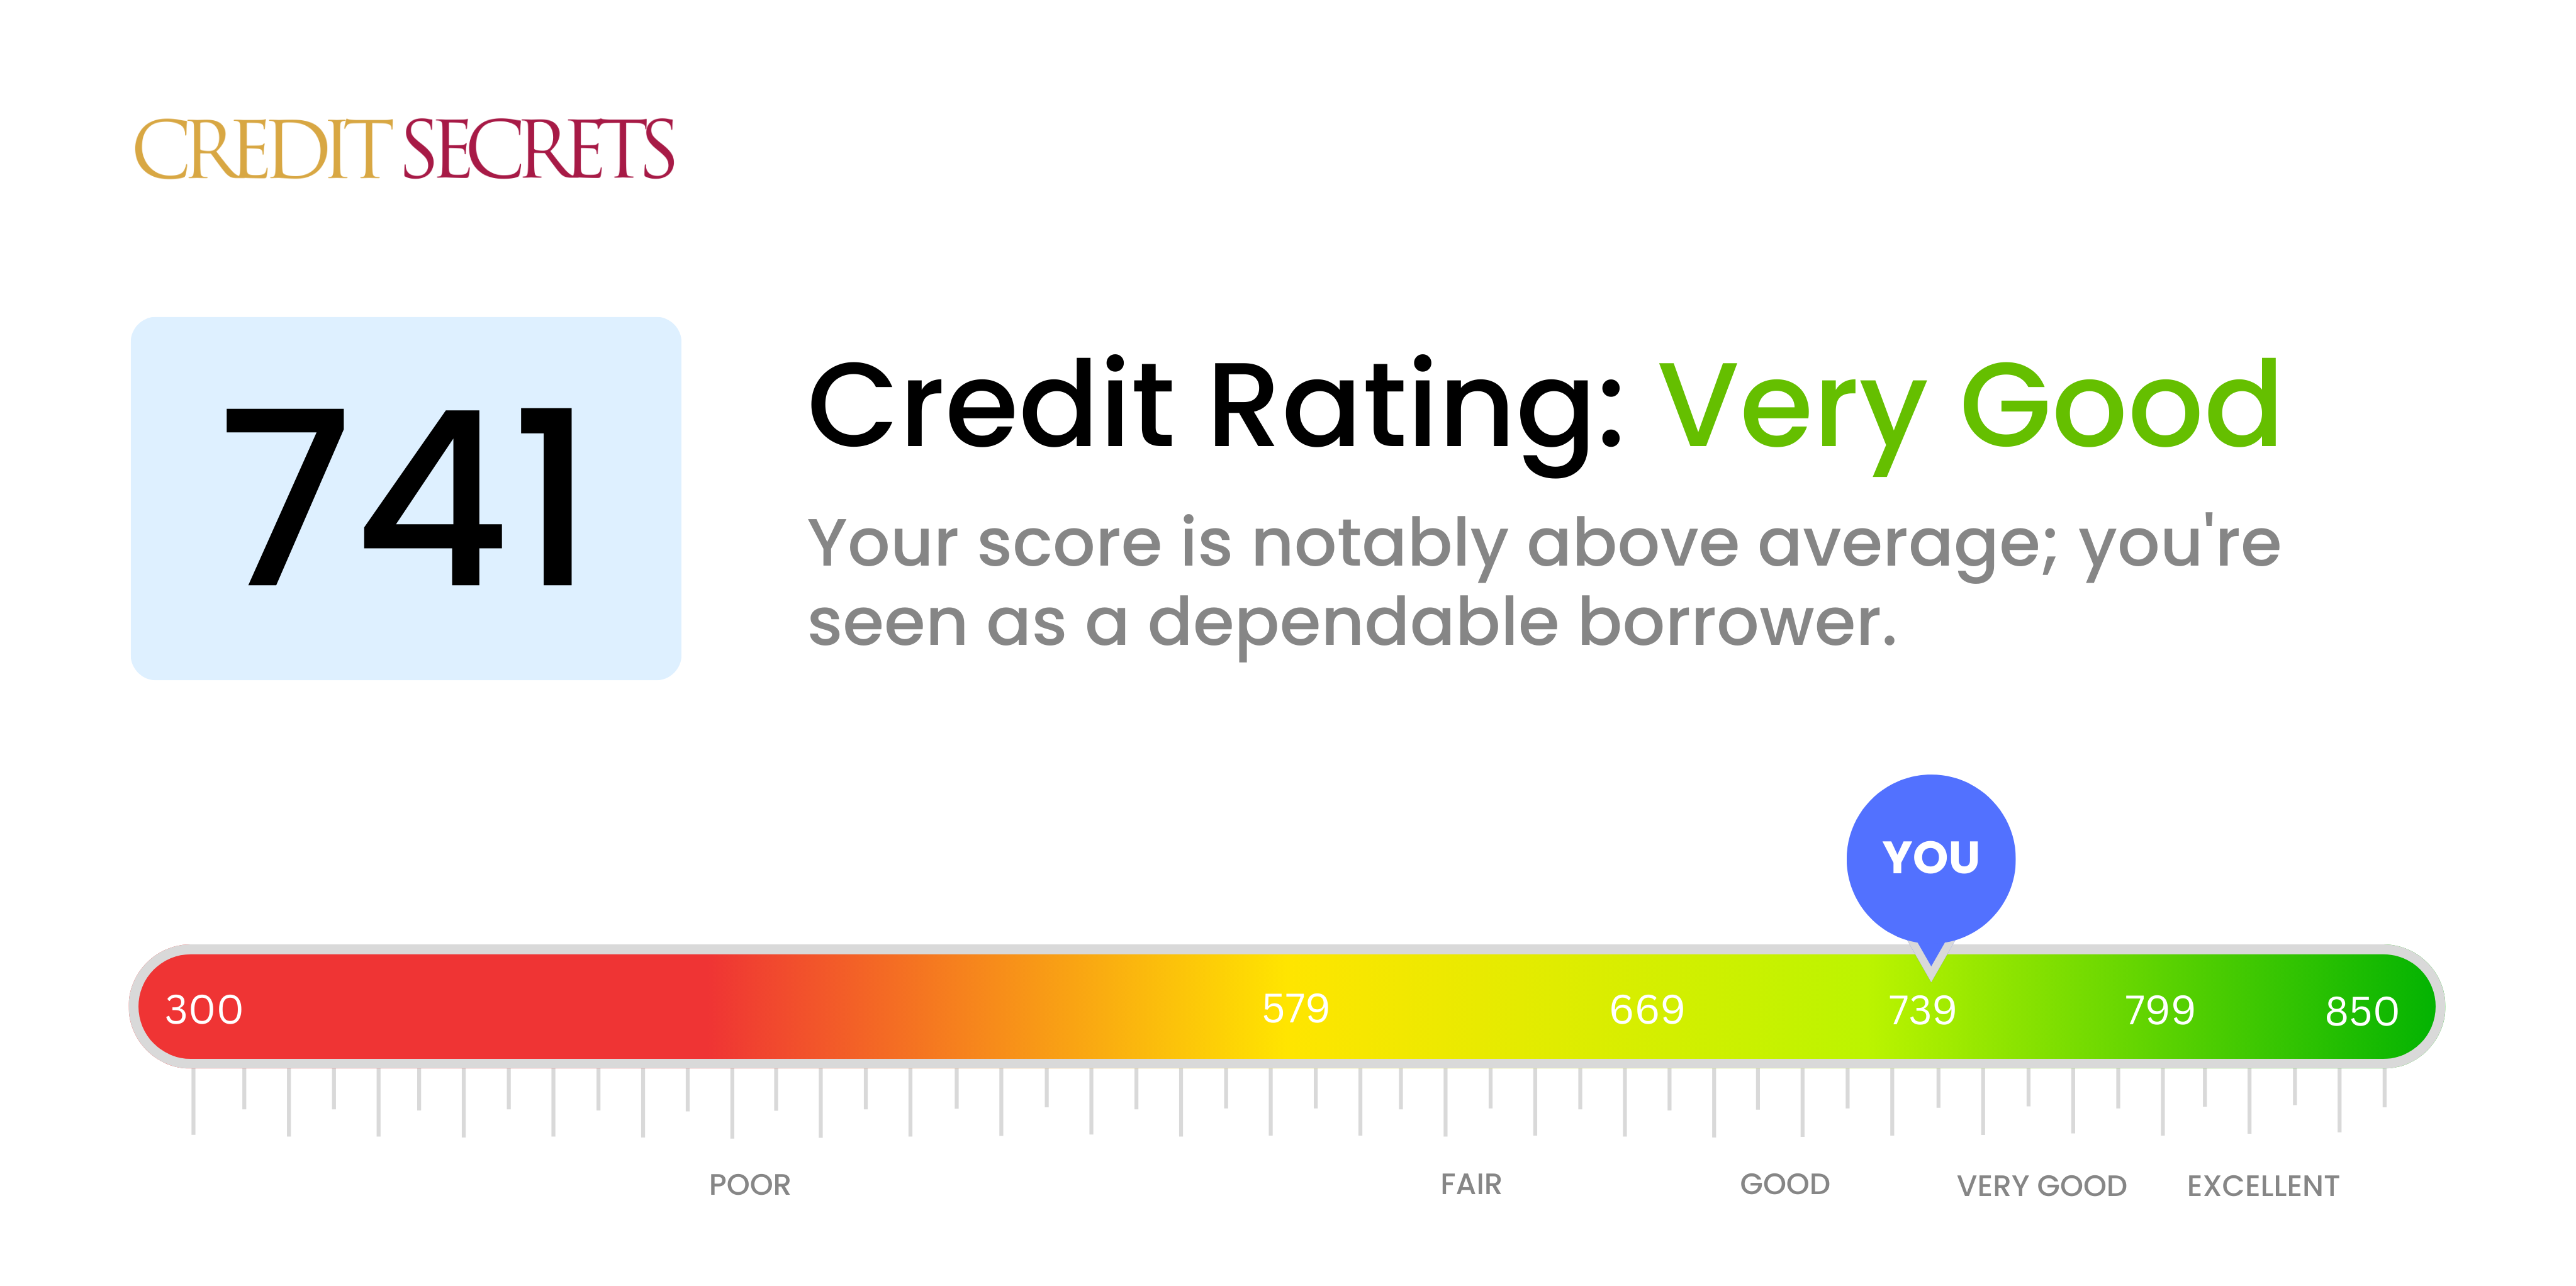 Is 741 a good credit score?